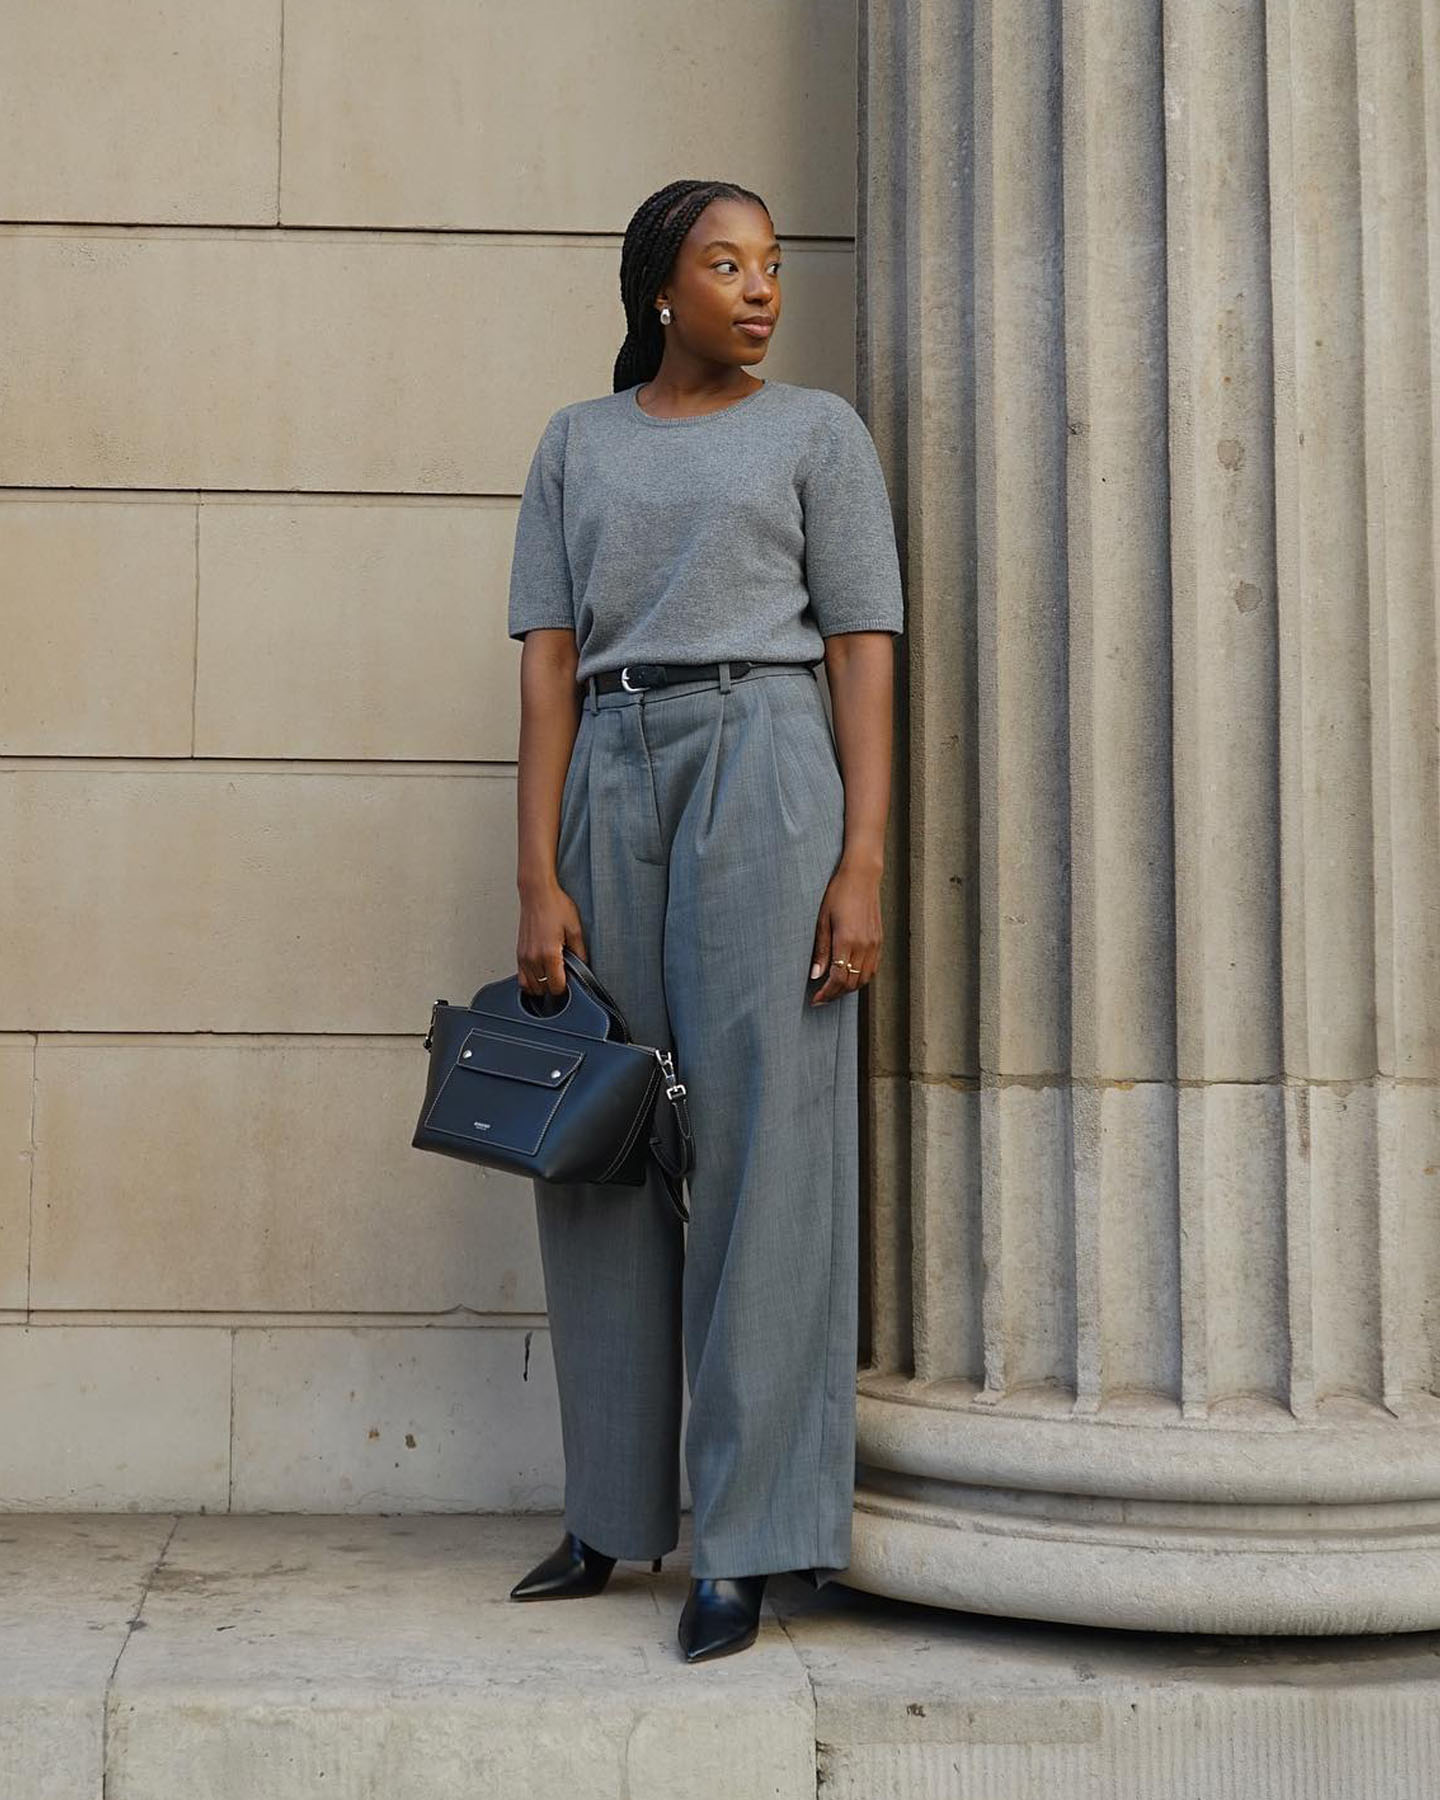 British influencer wears an all-gray outfit witj a short-sleeved sweater, belted trousers, a black bag, and black pointed-toe boots.